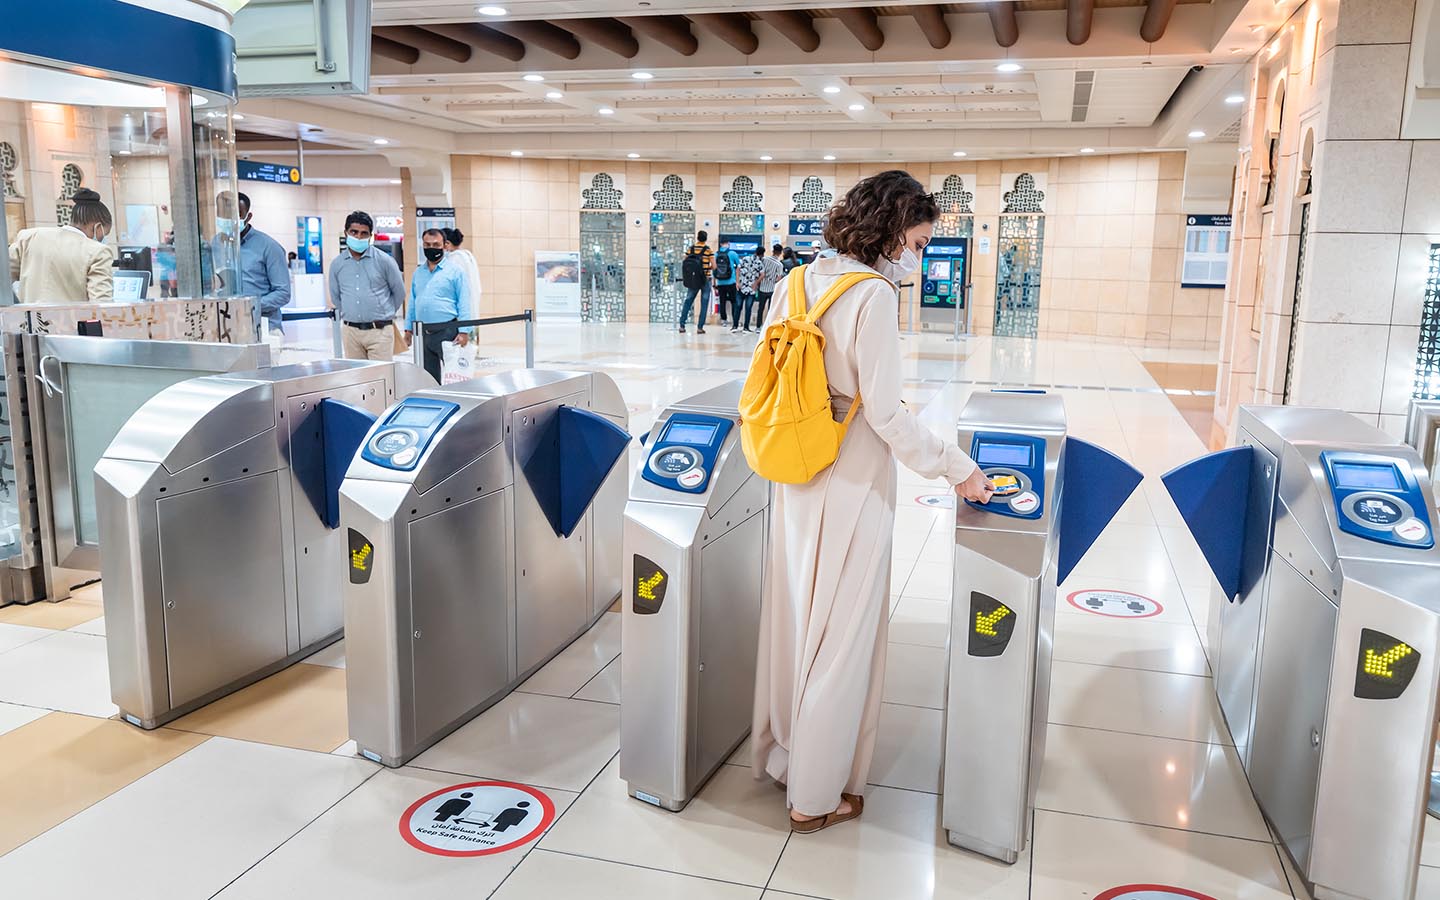 JLT has two metro stations in two of its clusters